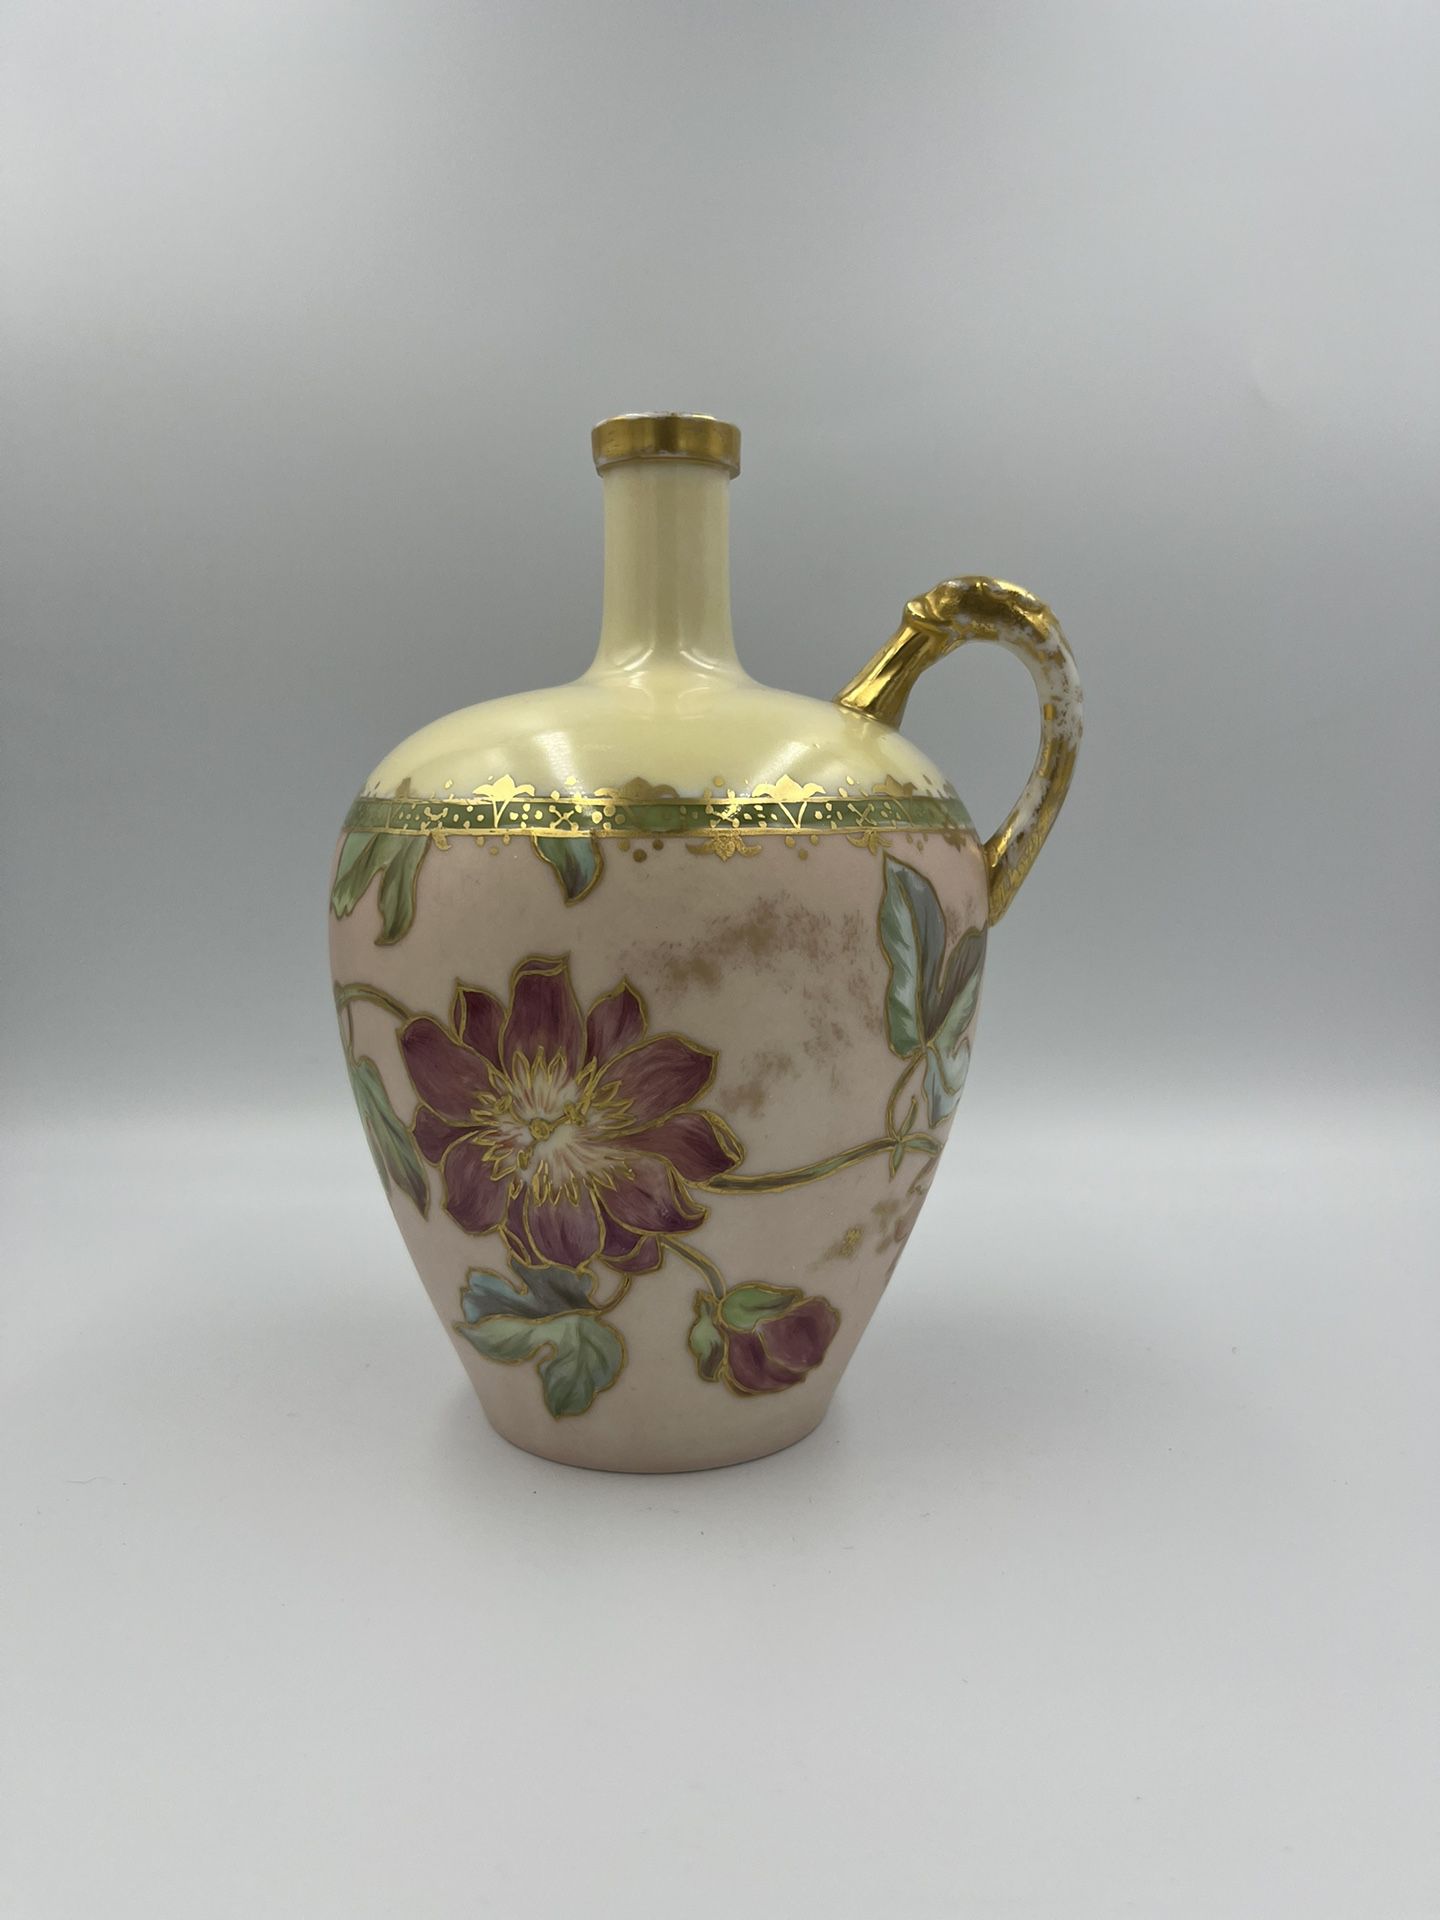 Vintage Rare Asian Gorgeous Bulbous  Hand Crafted Hand Painted Porcelain Floral Pitcher / Vase with Gold Gilt